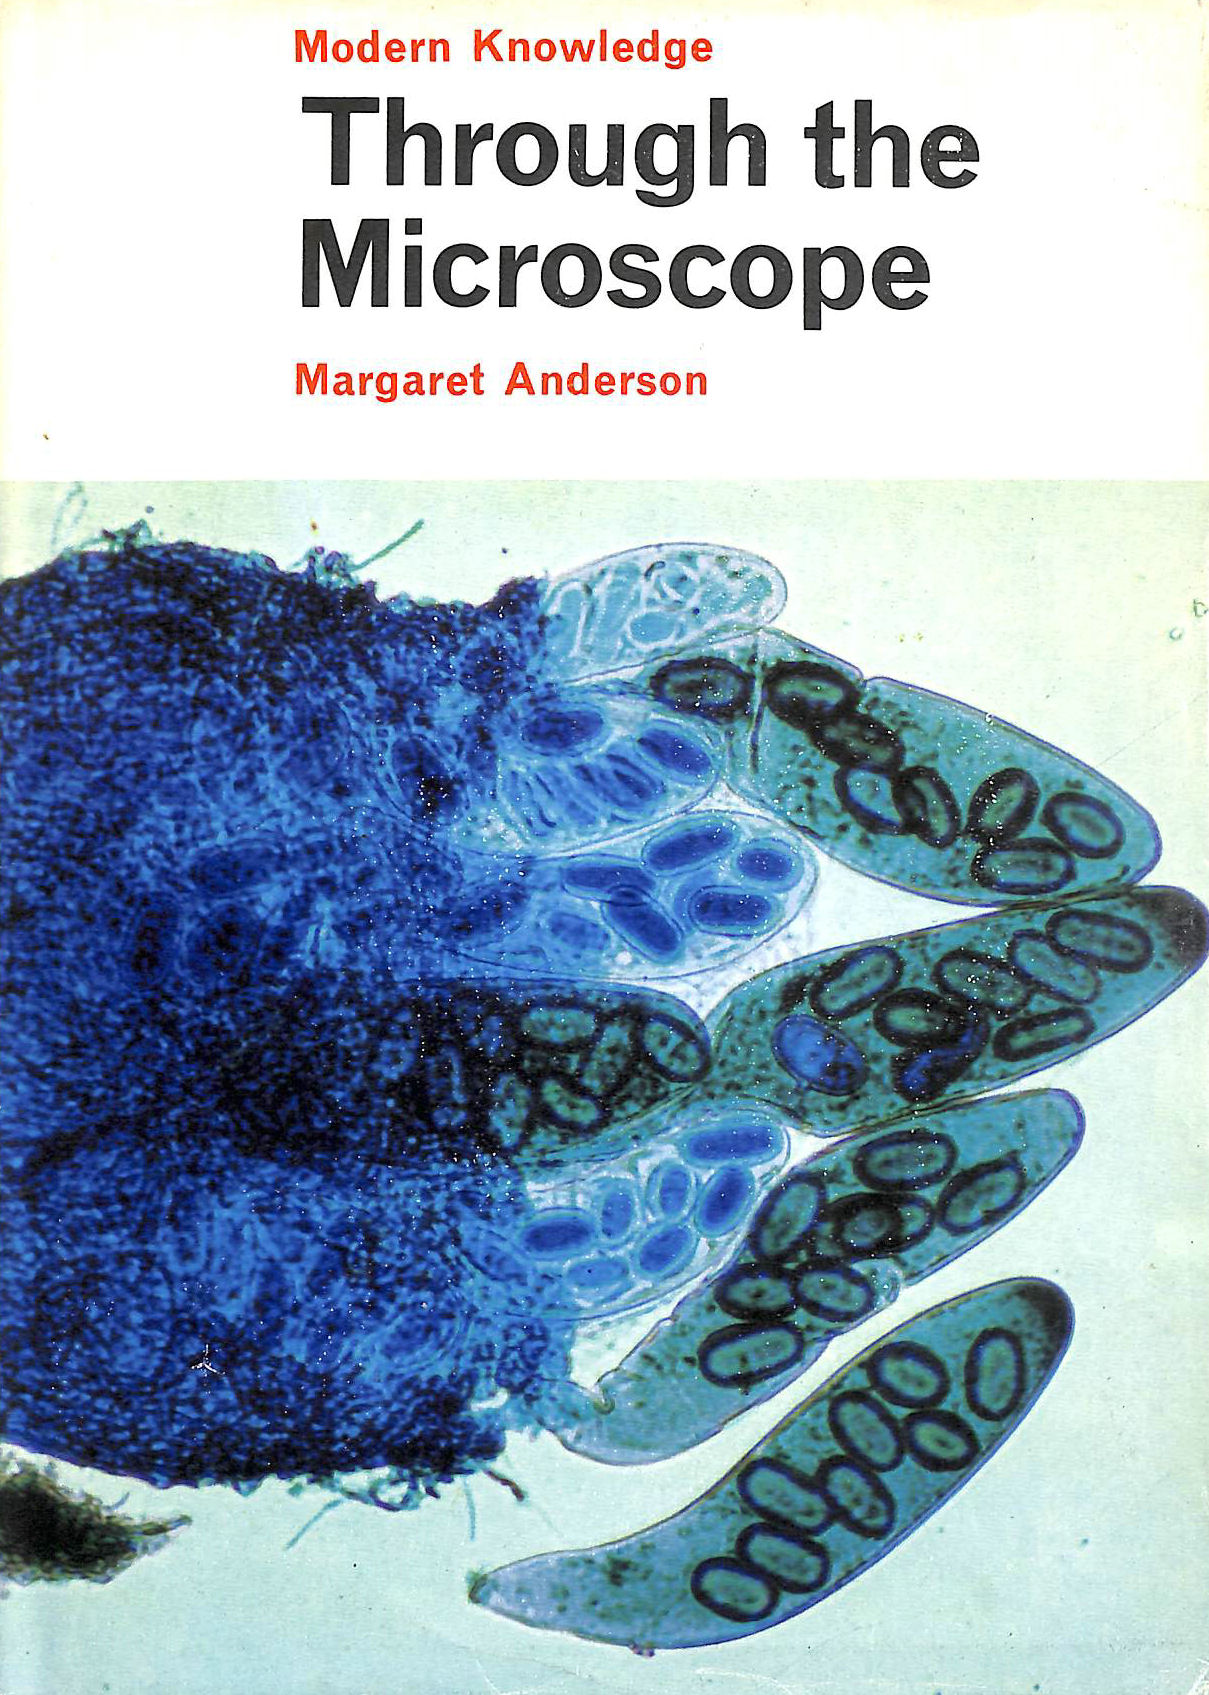 ANDERSON, MARGARET DAMPIER - Through the Microscope (Modern Knowledge S.)